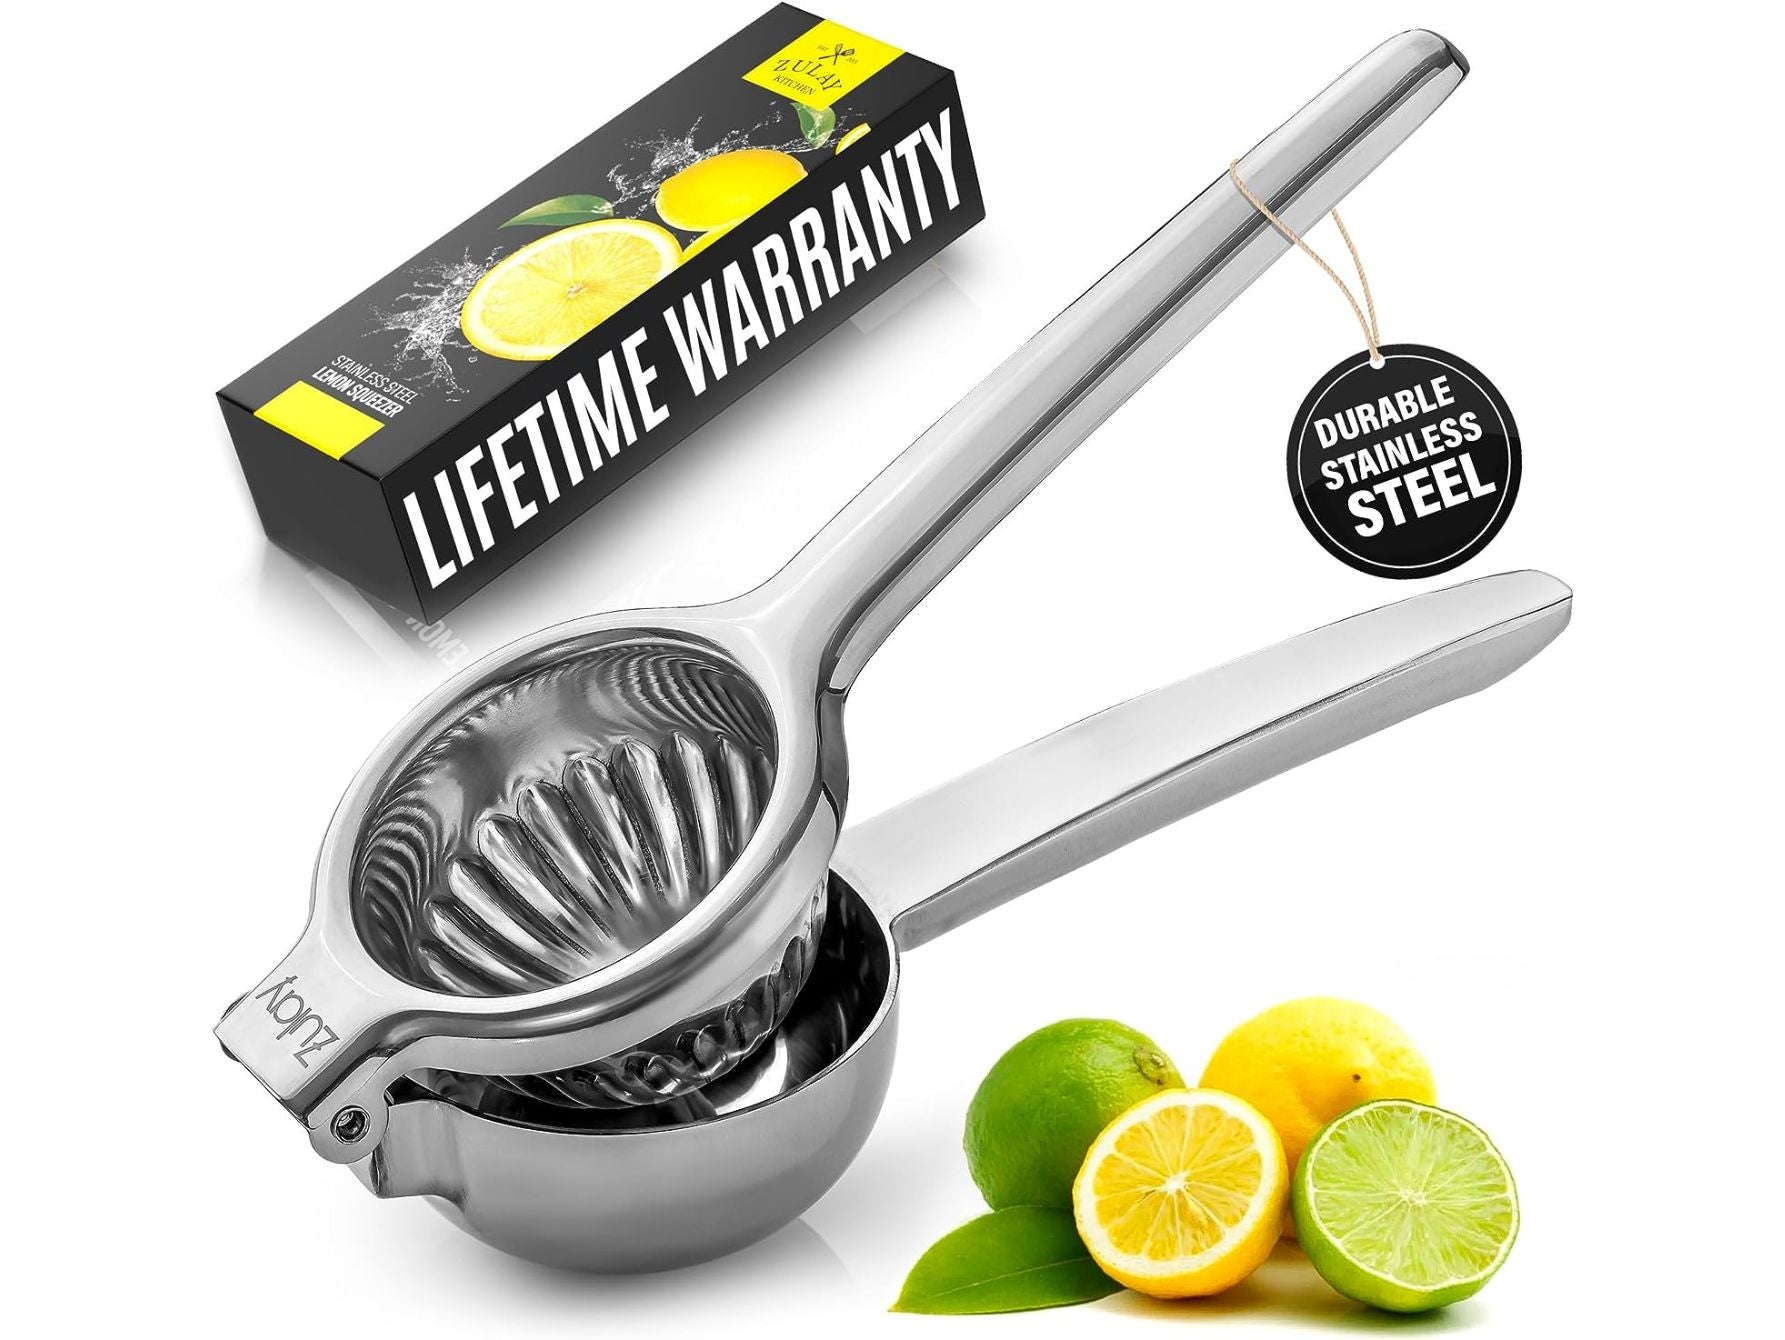 Stainless steel Lemon Squeezer by Zulay Kitchen